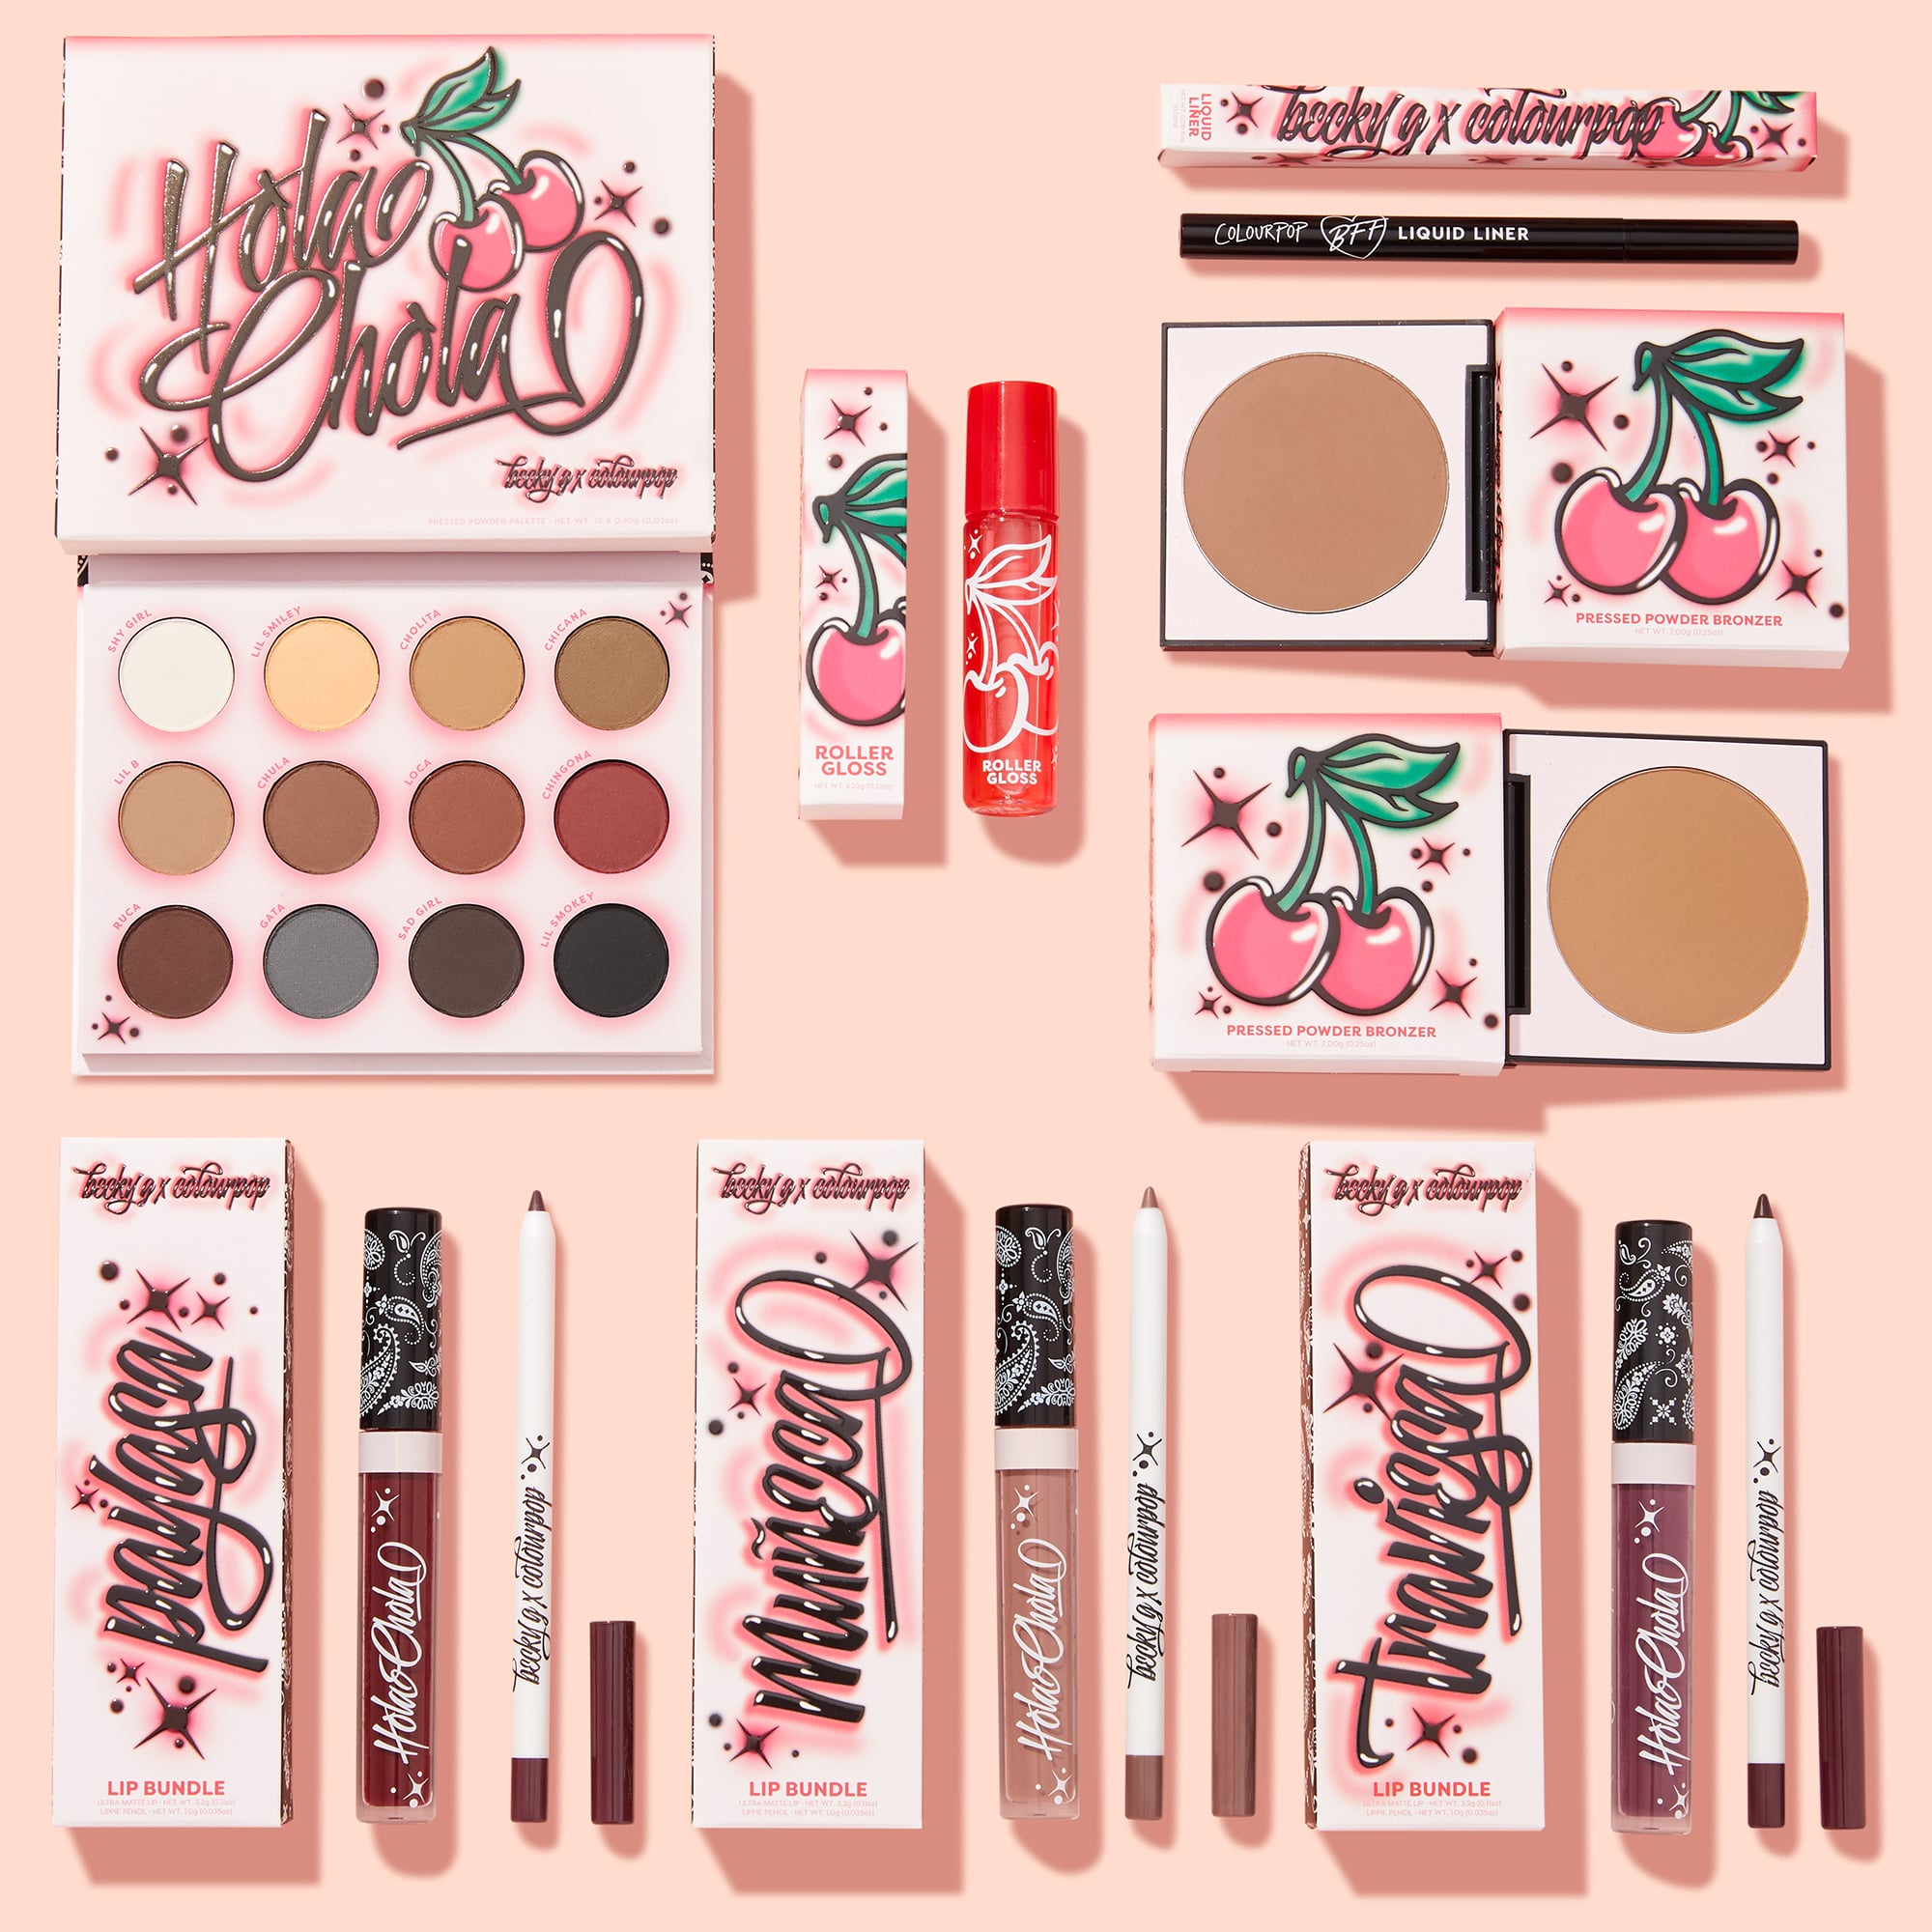 ColourPop and Becky G Hola Chola Makeup Collection | POPSUGAR Beauty